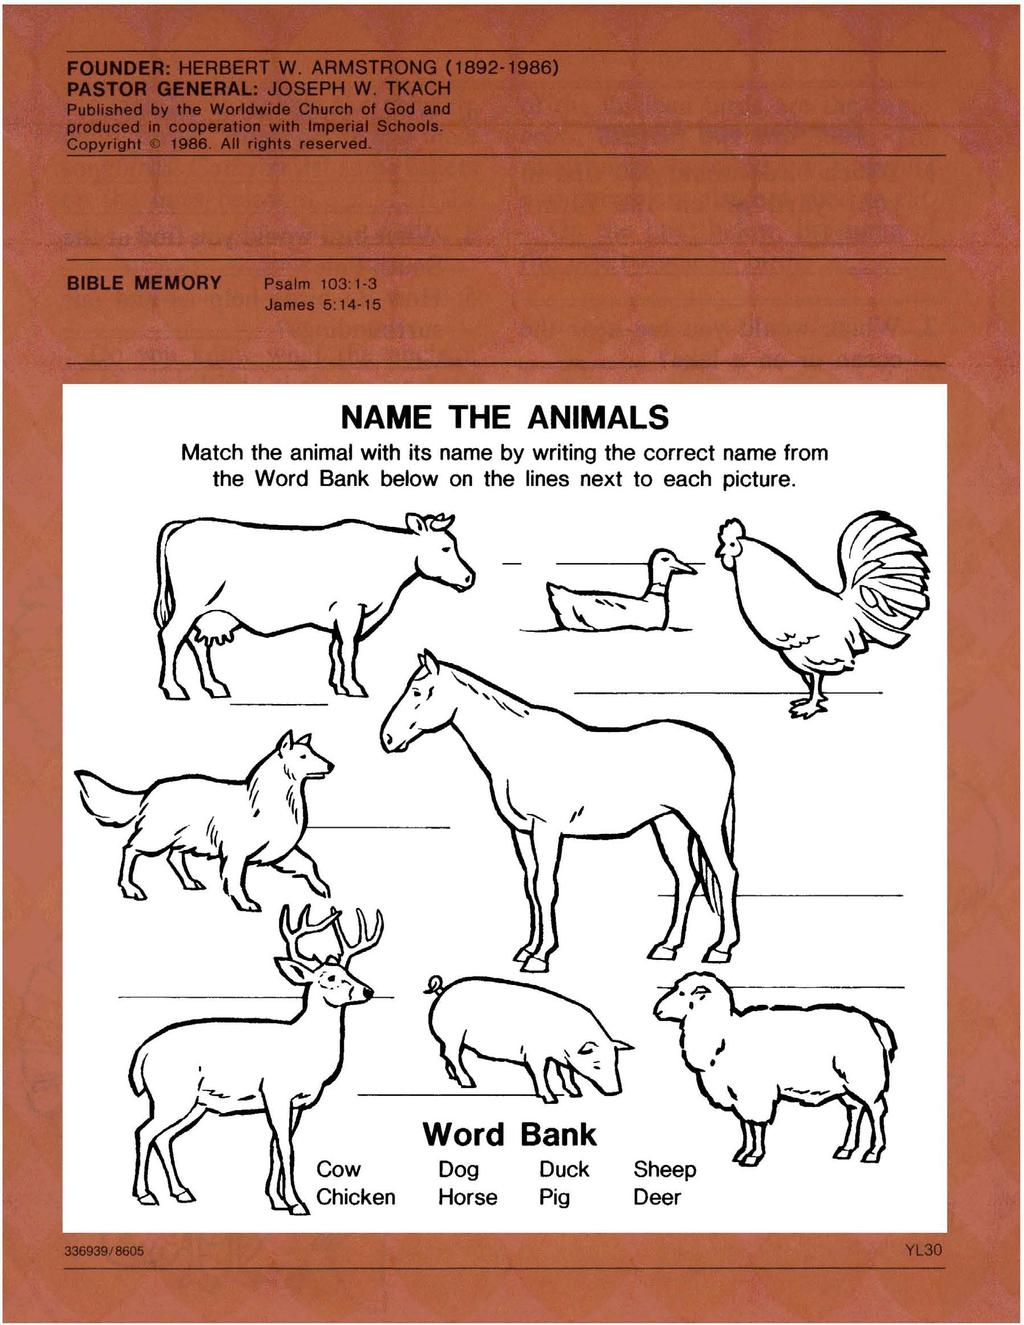 NAME THE ANIMALS Match the animal with its name by writing the